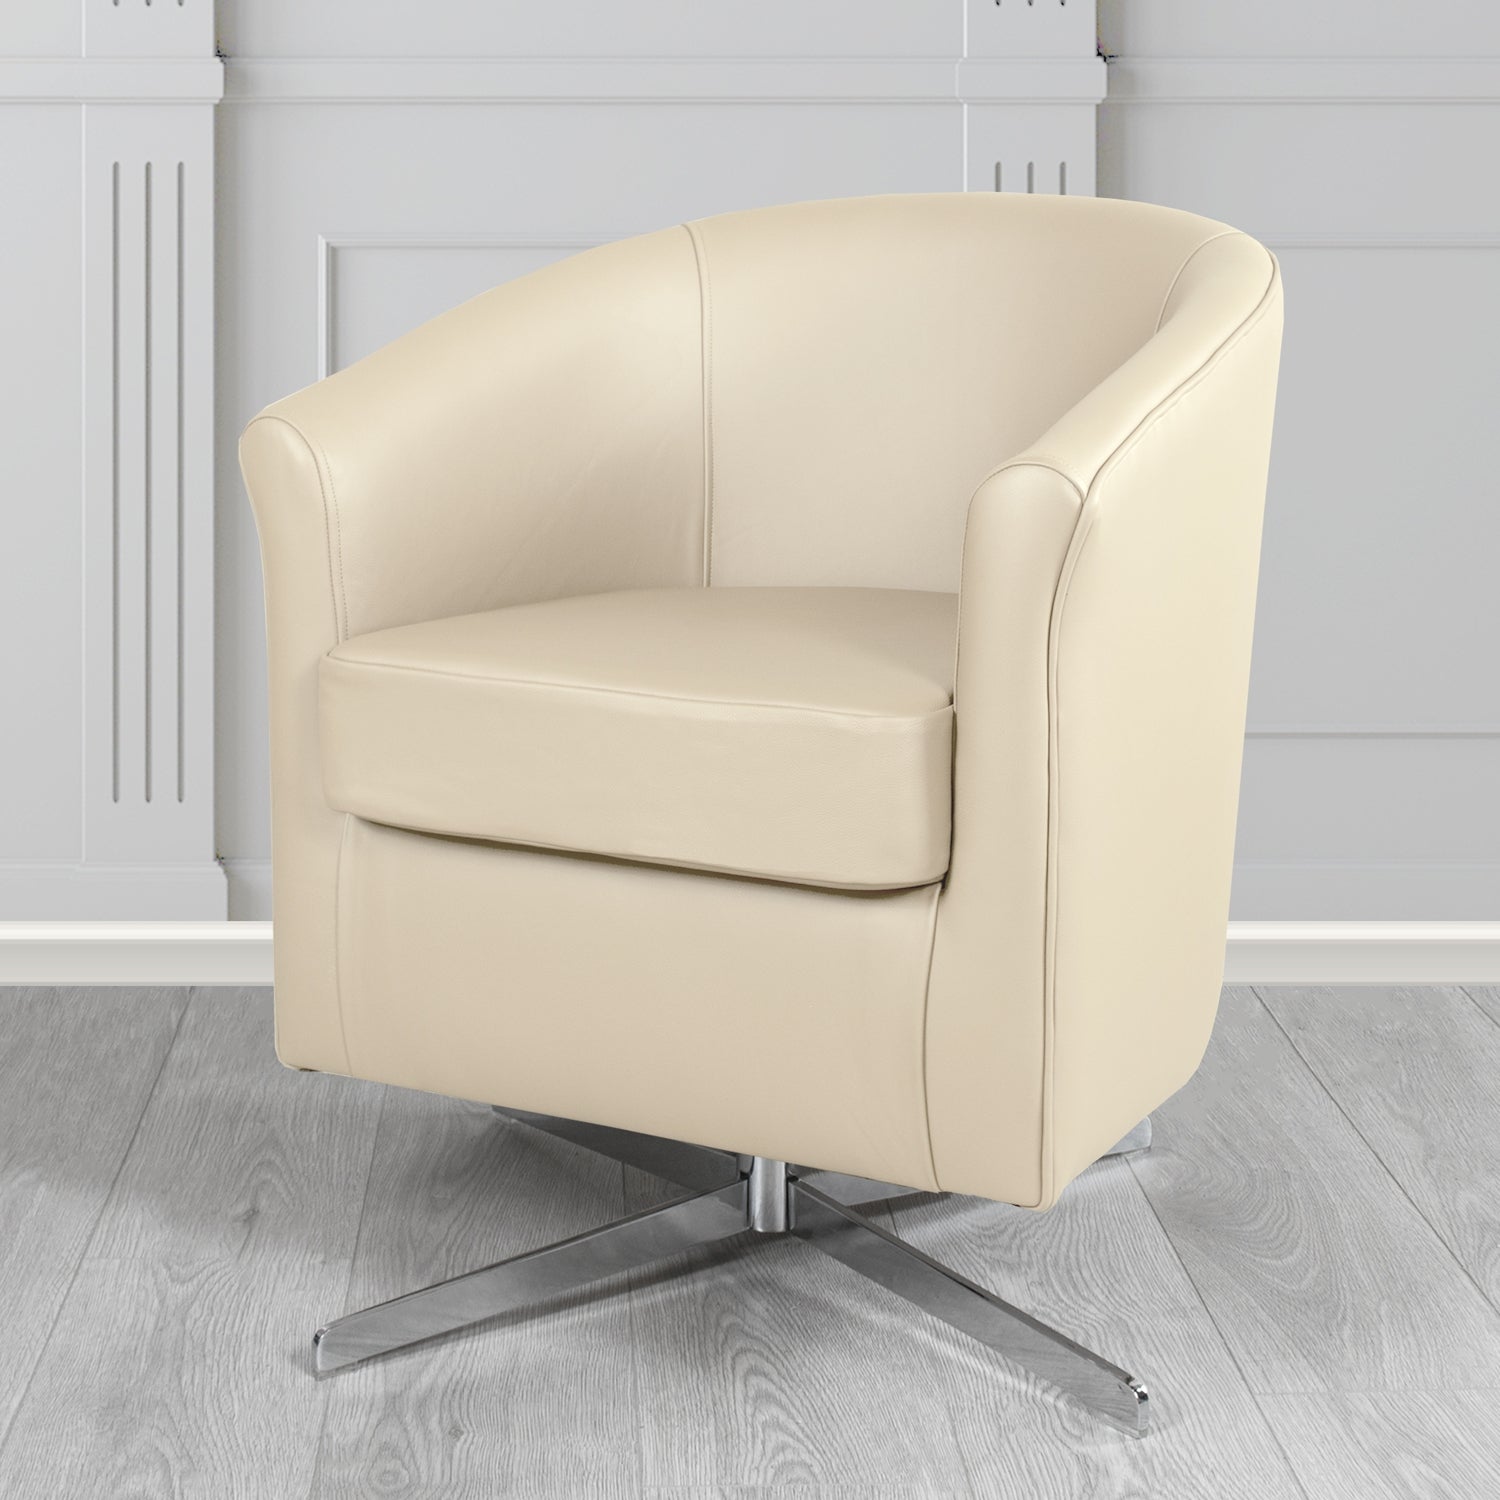 Cannes Swivel Tub Chair in Shelly Ivory Crib 5 Genuine Leather - The Tub Chair Shop